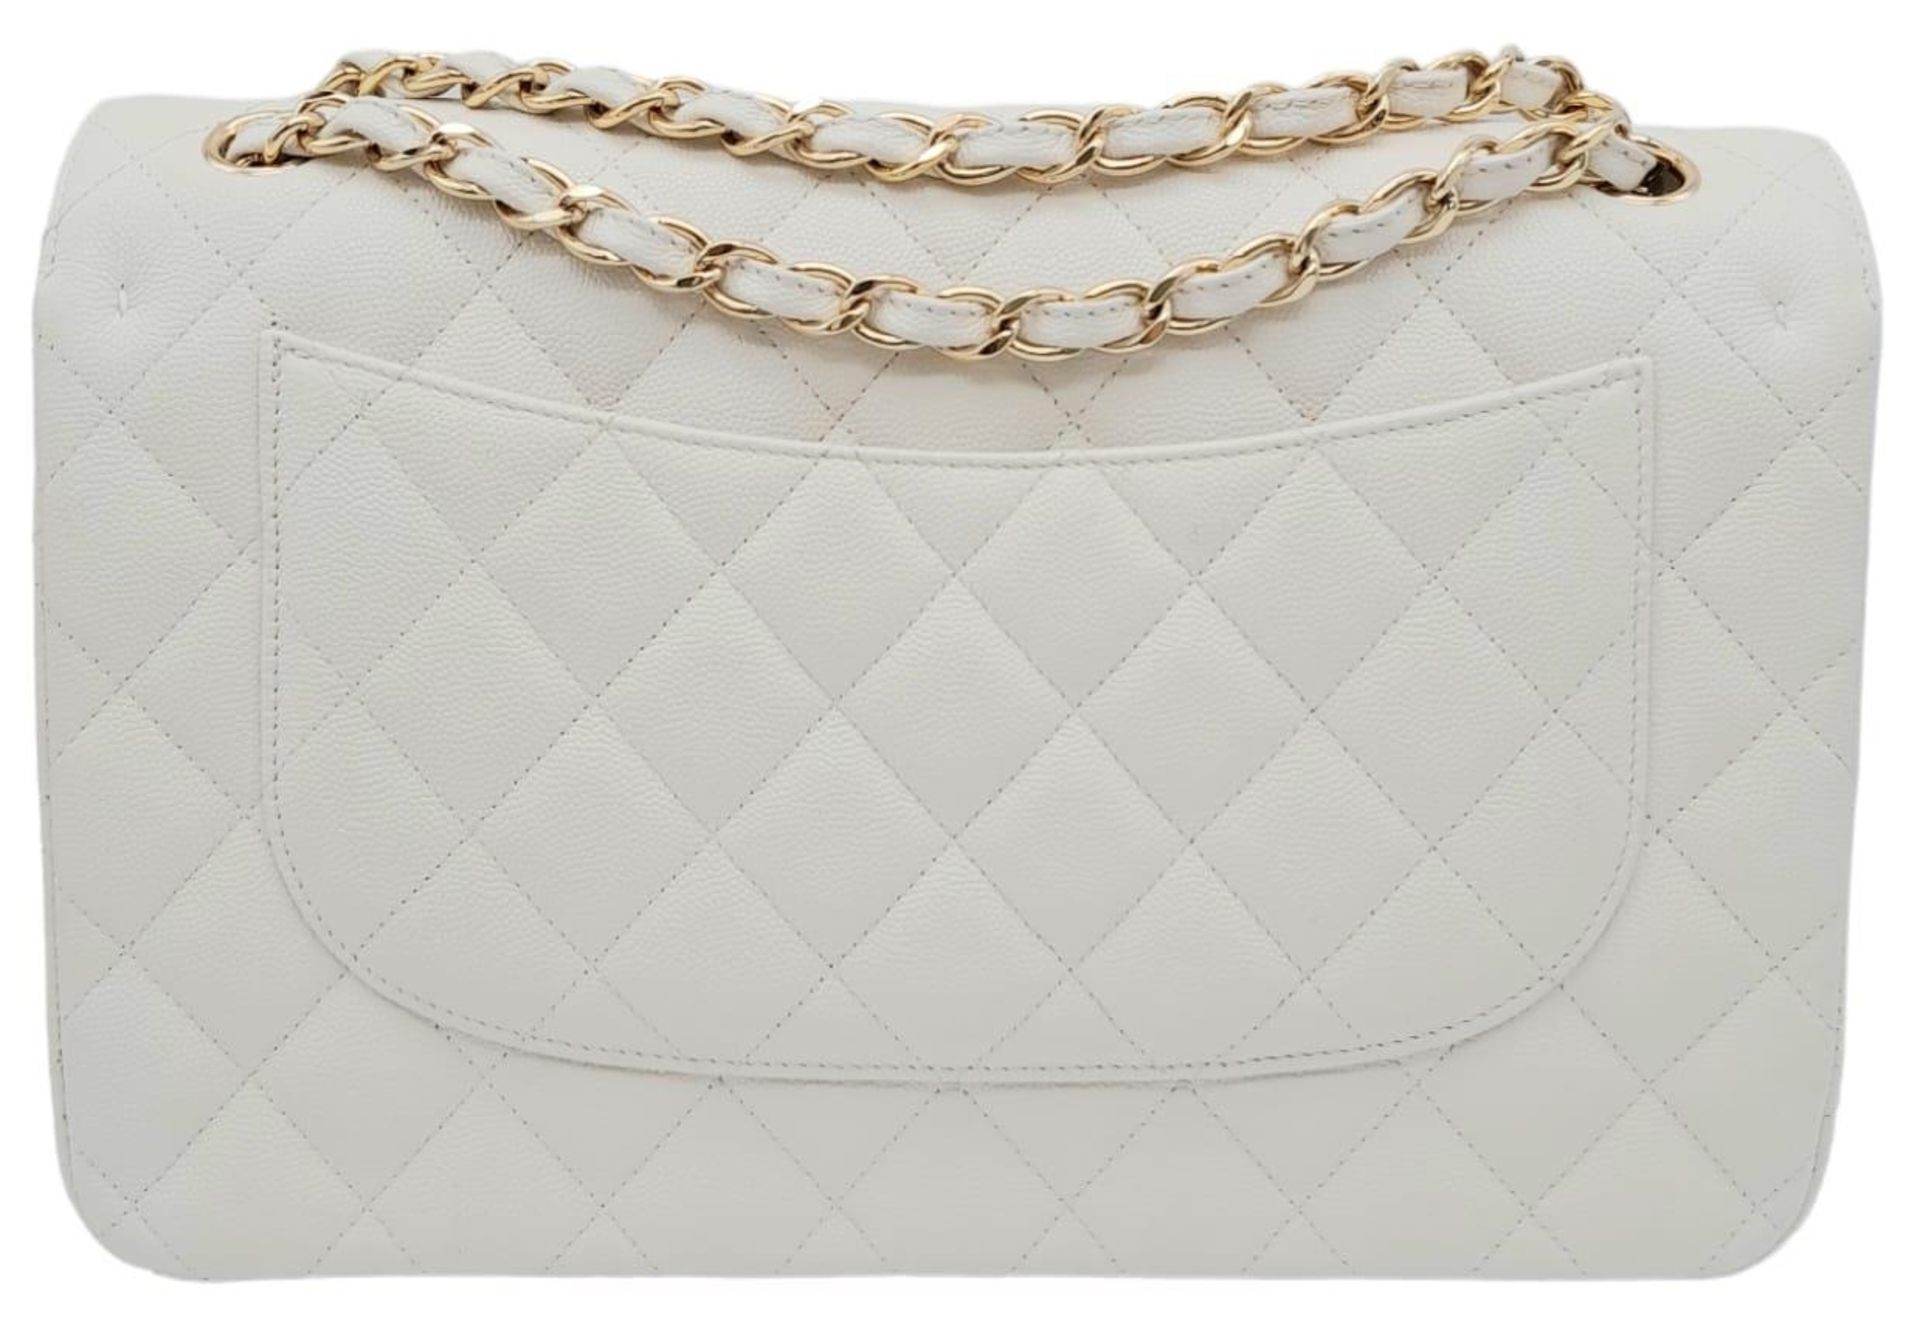 Chanel Caviar Jumbo Single Flap Bag. Quilted white caviar leather stitched in diamond pattern. - Image 5 of 15